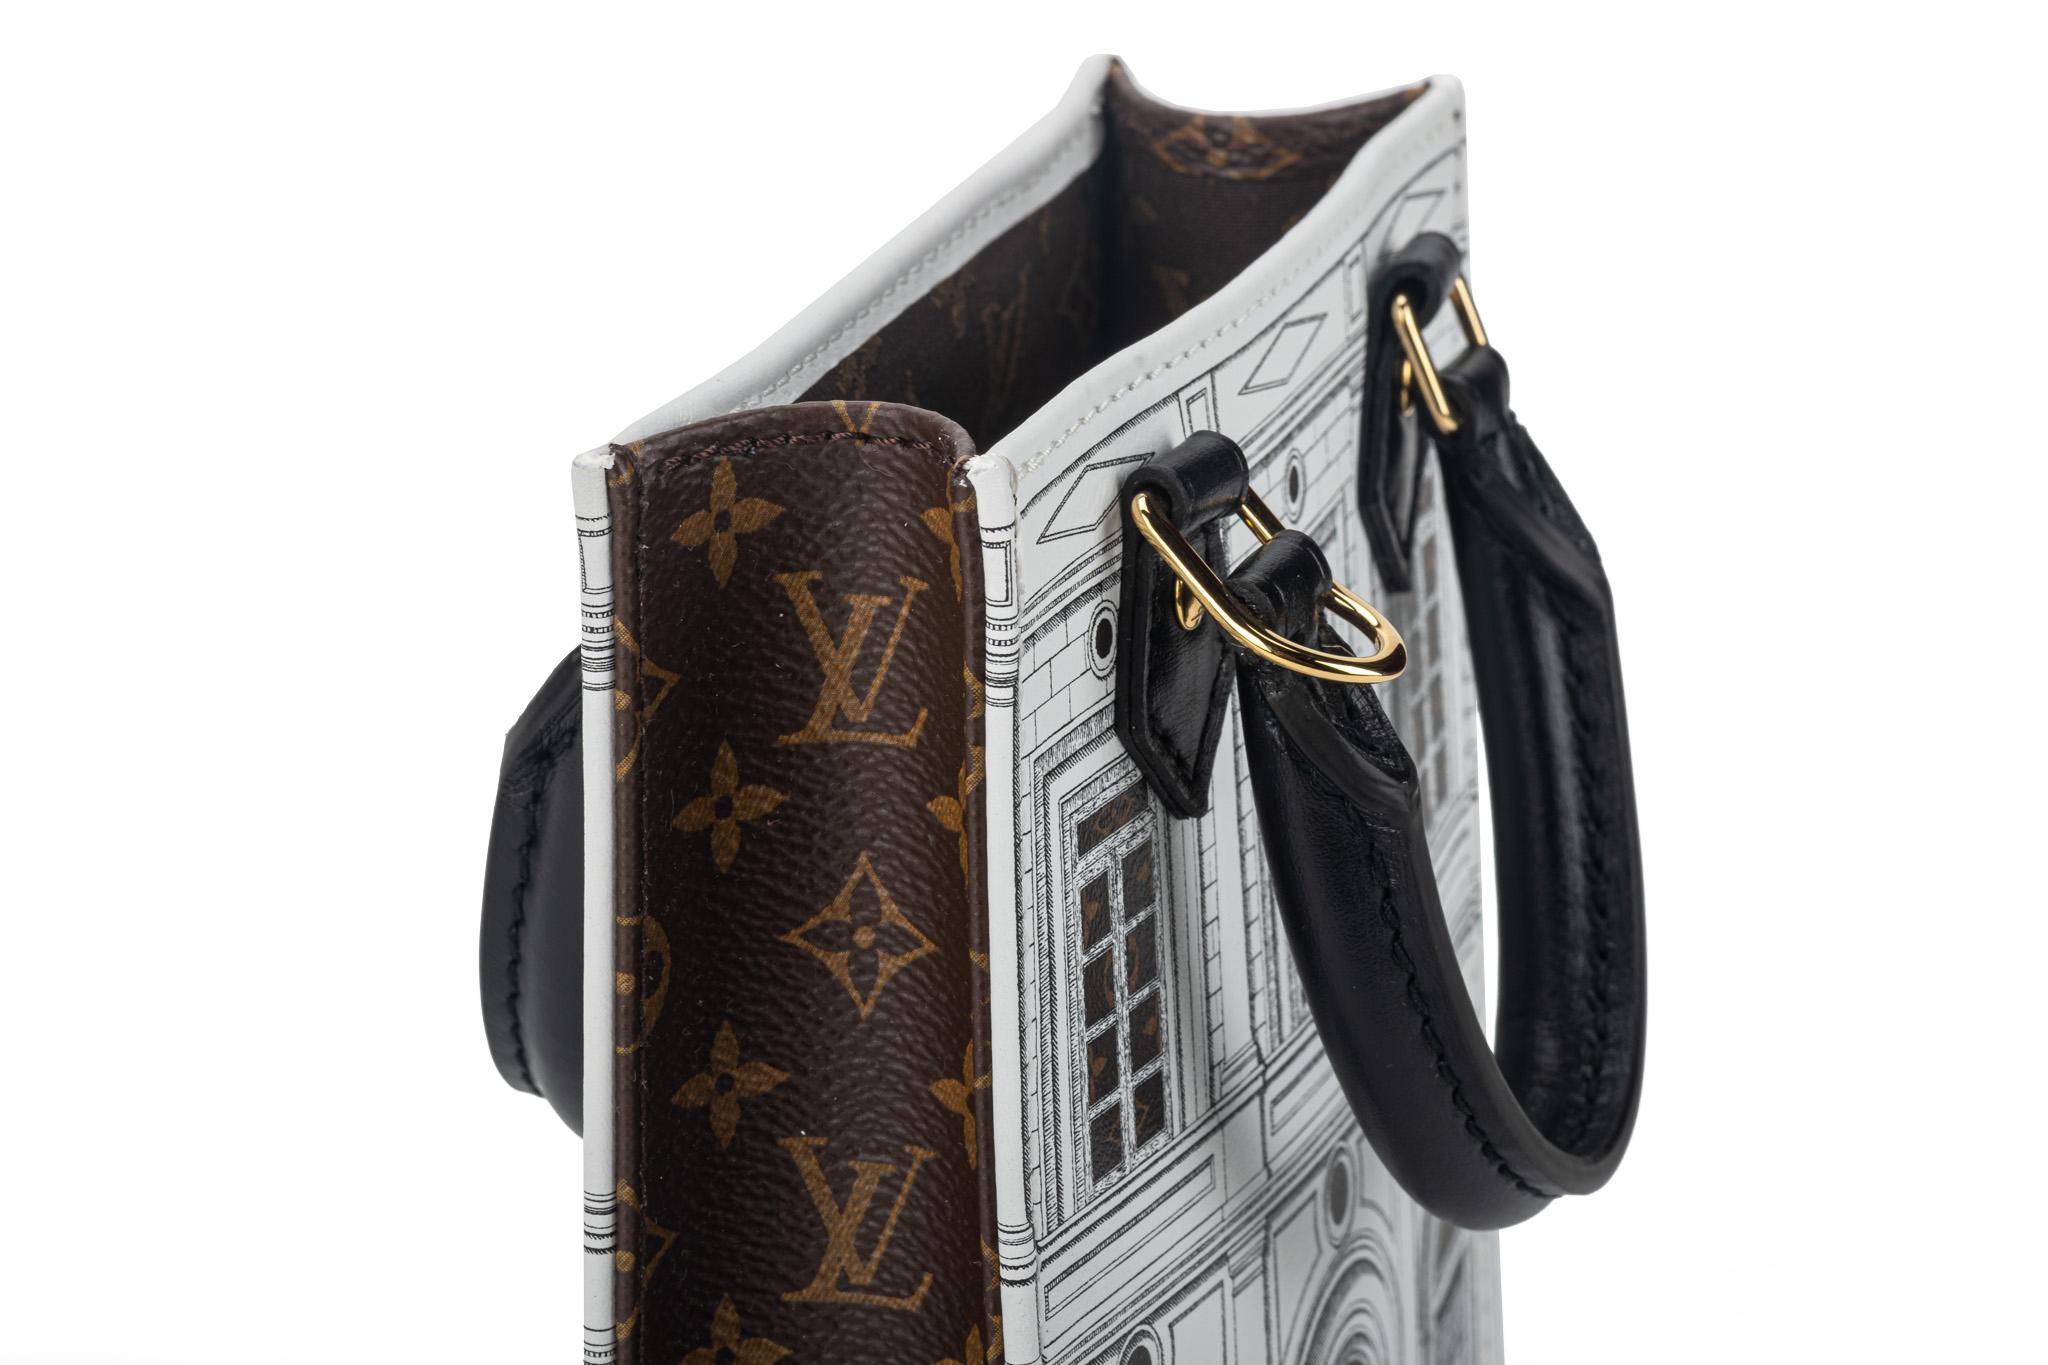 New Louis Vuitton Limited Edition Fornasetti Sac Plat Bag For Sale 2